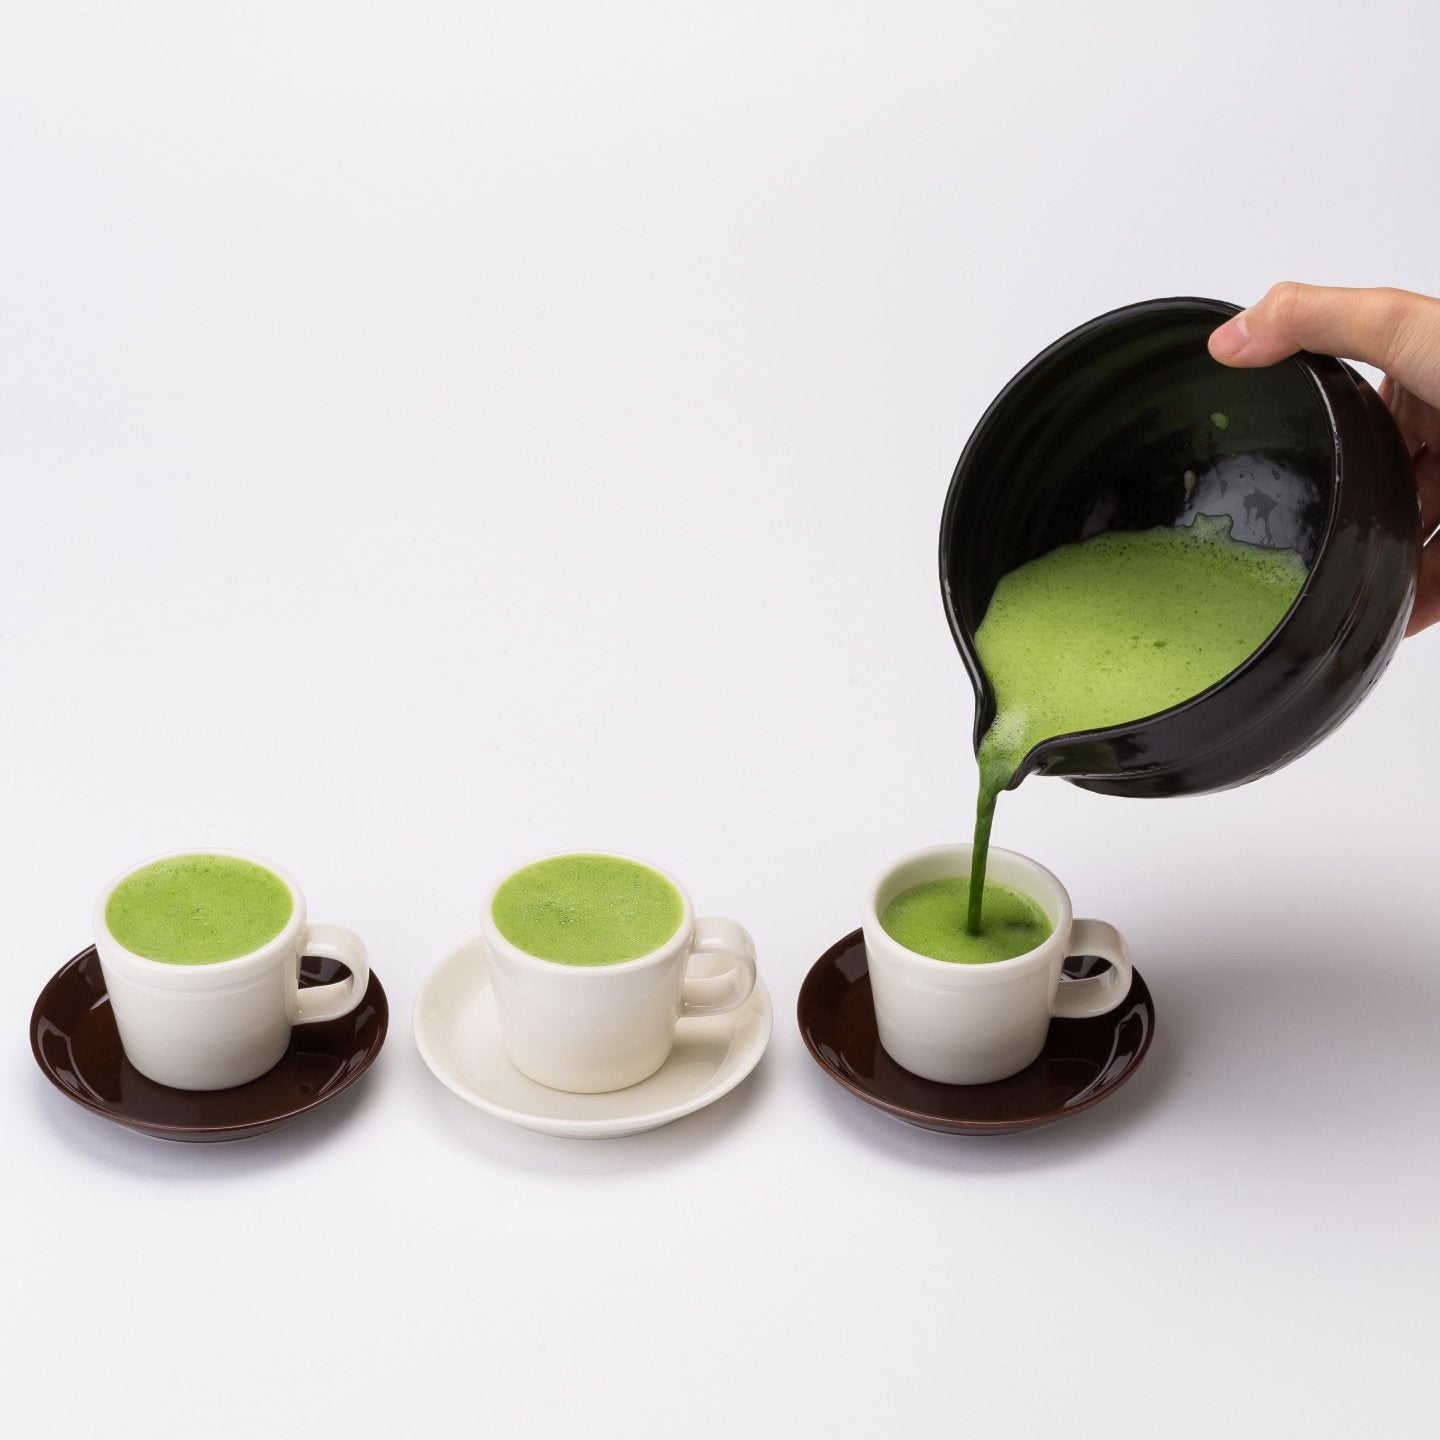 Preparing several servings of matcha (Tea Bowl with Serving Spout)